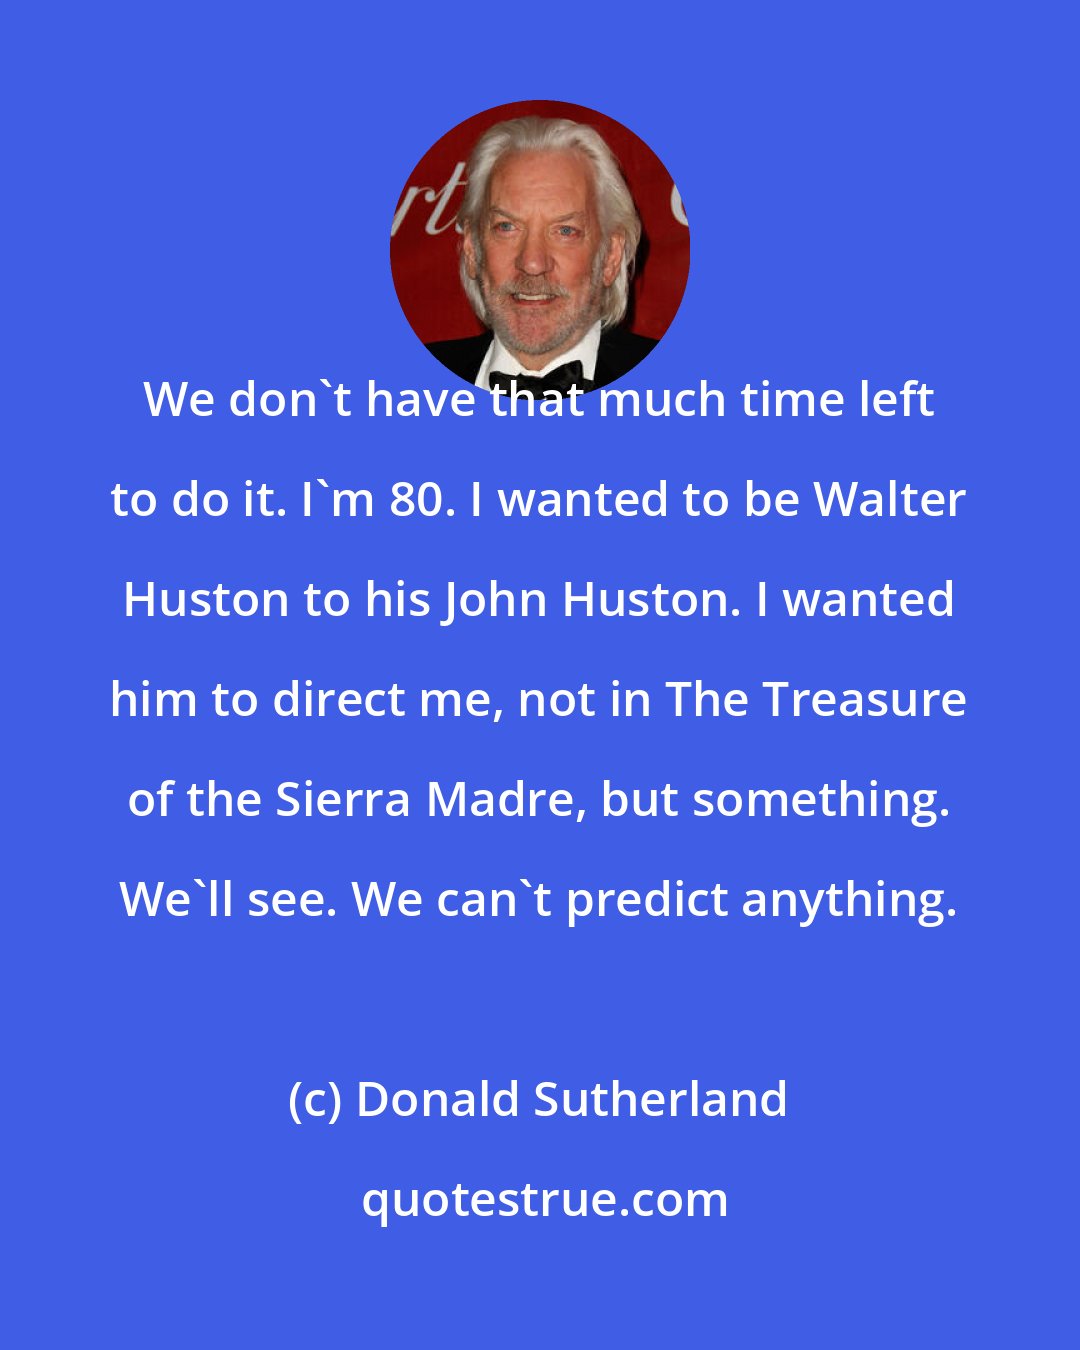 Donald Sutherland: We don't have that much time left to do it. I'm 80. I wanted to be Walter Huston to his John Huston. I wanted him to direct me, not in The Treasure of the Sierra Madre, but something. We'll see. We can't predict anything.